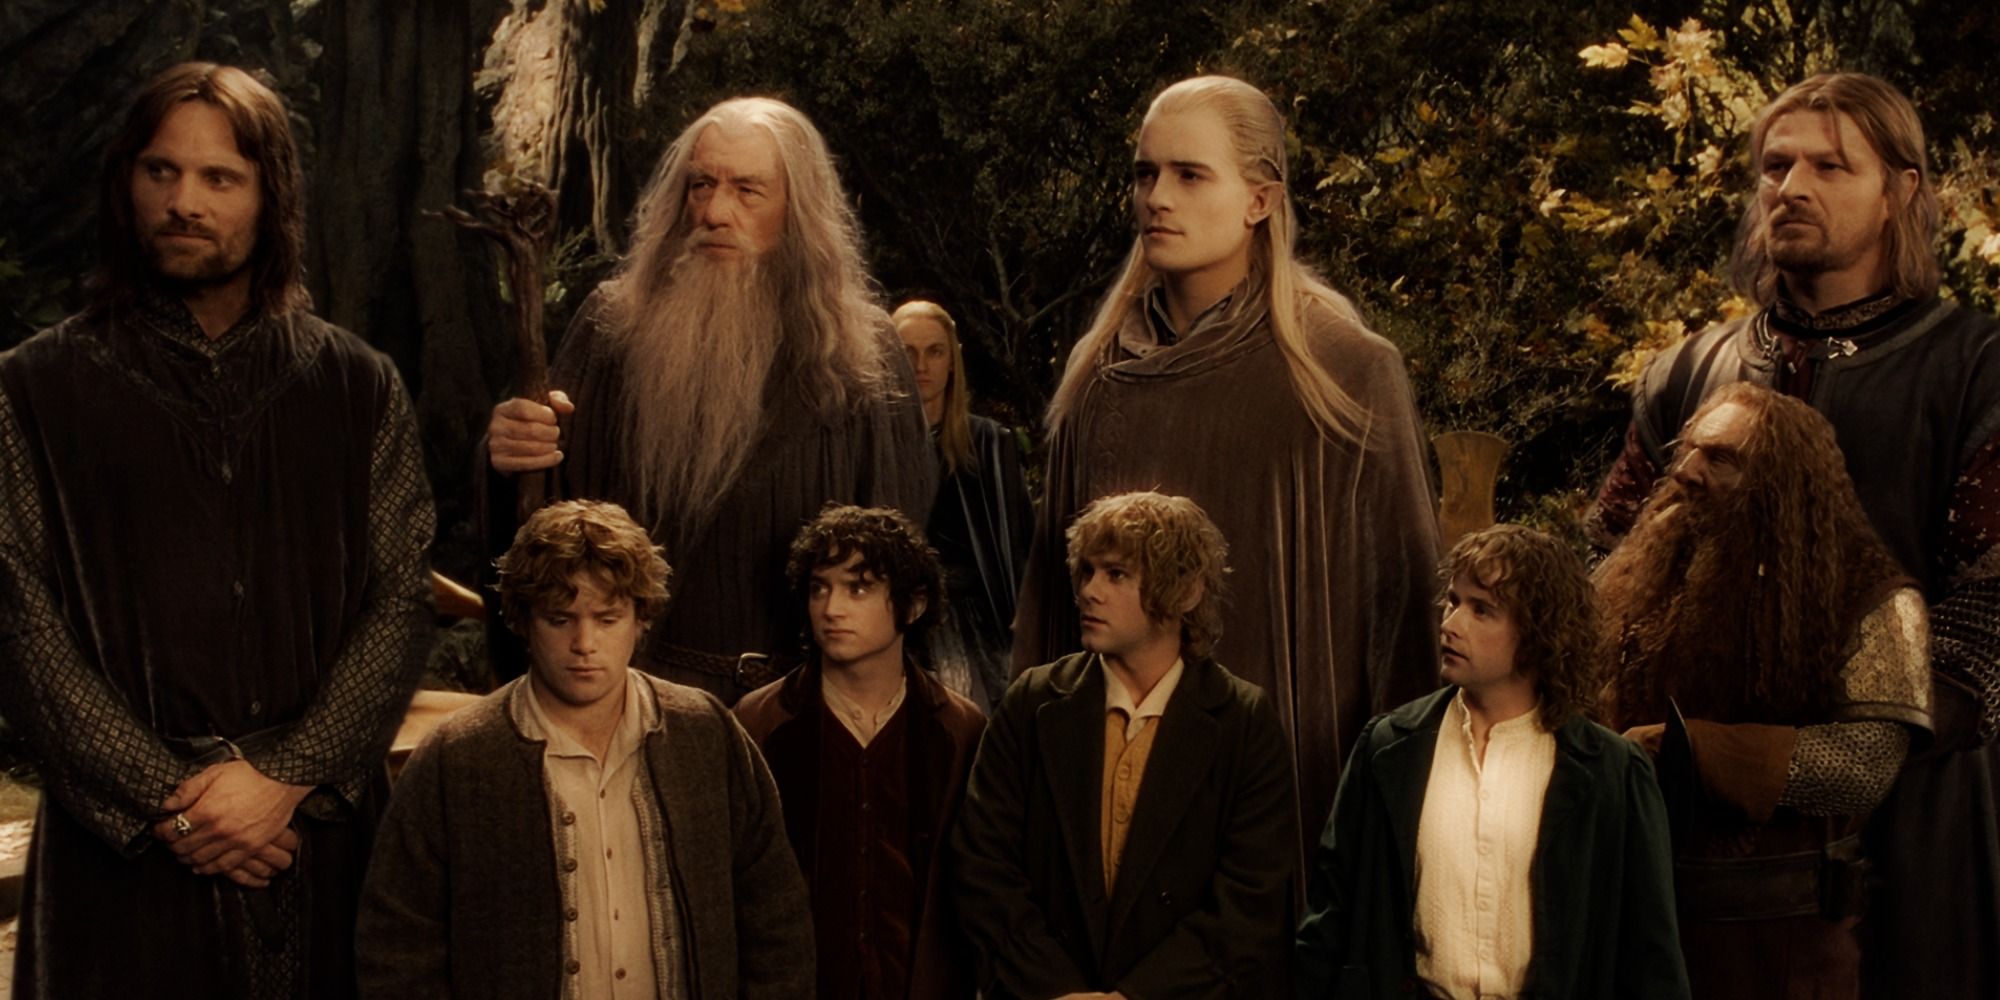 The Fellowship gathered for the first time in The Lord of the Rings: The Fellowship of the Ring